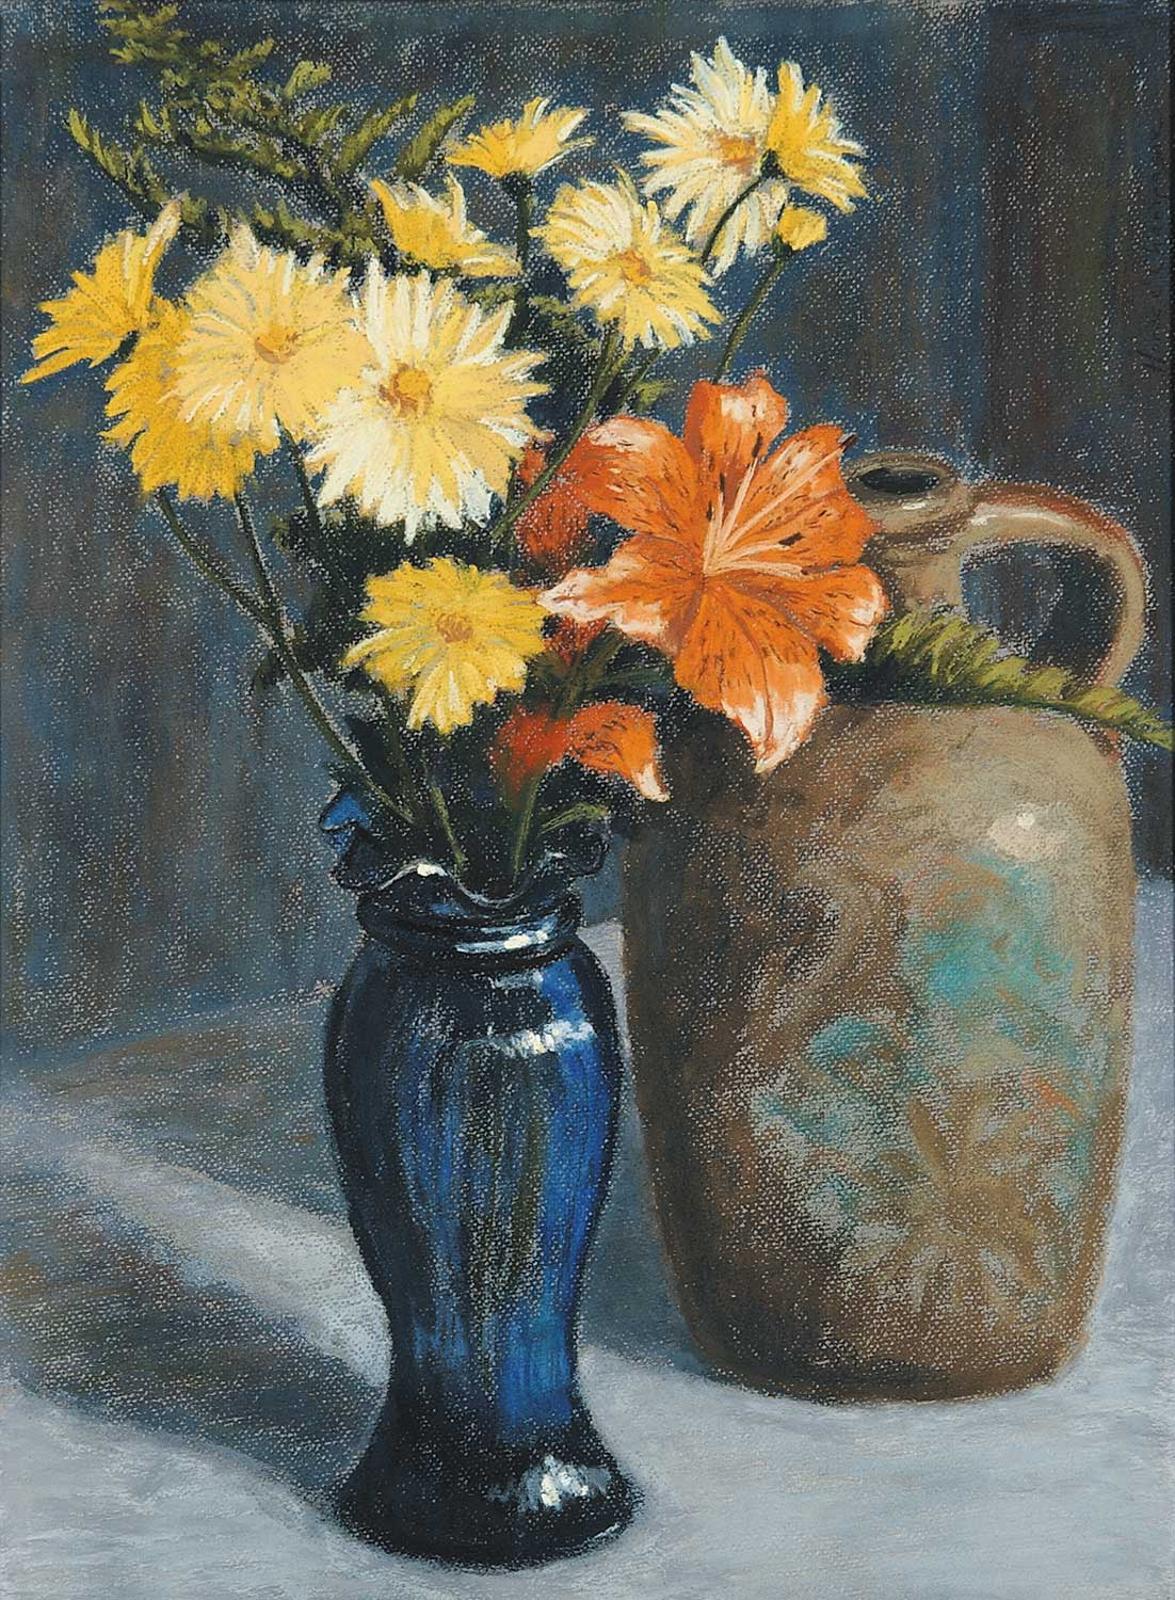 Horace Champagne (1937) - Orange Lily and Blue Vase